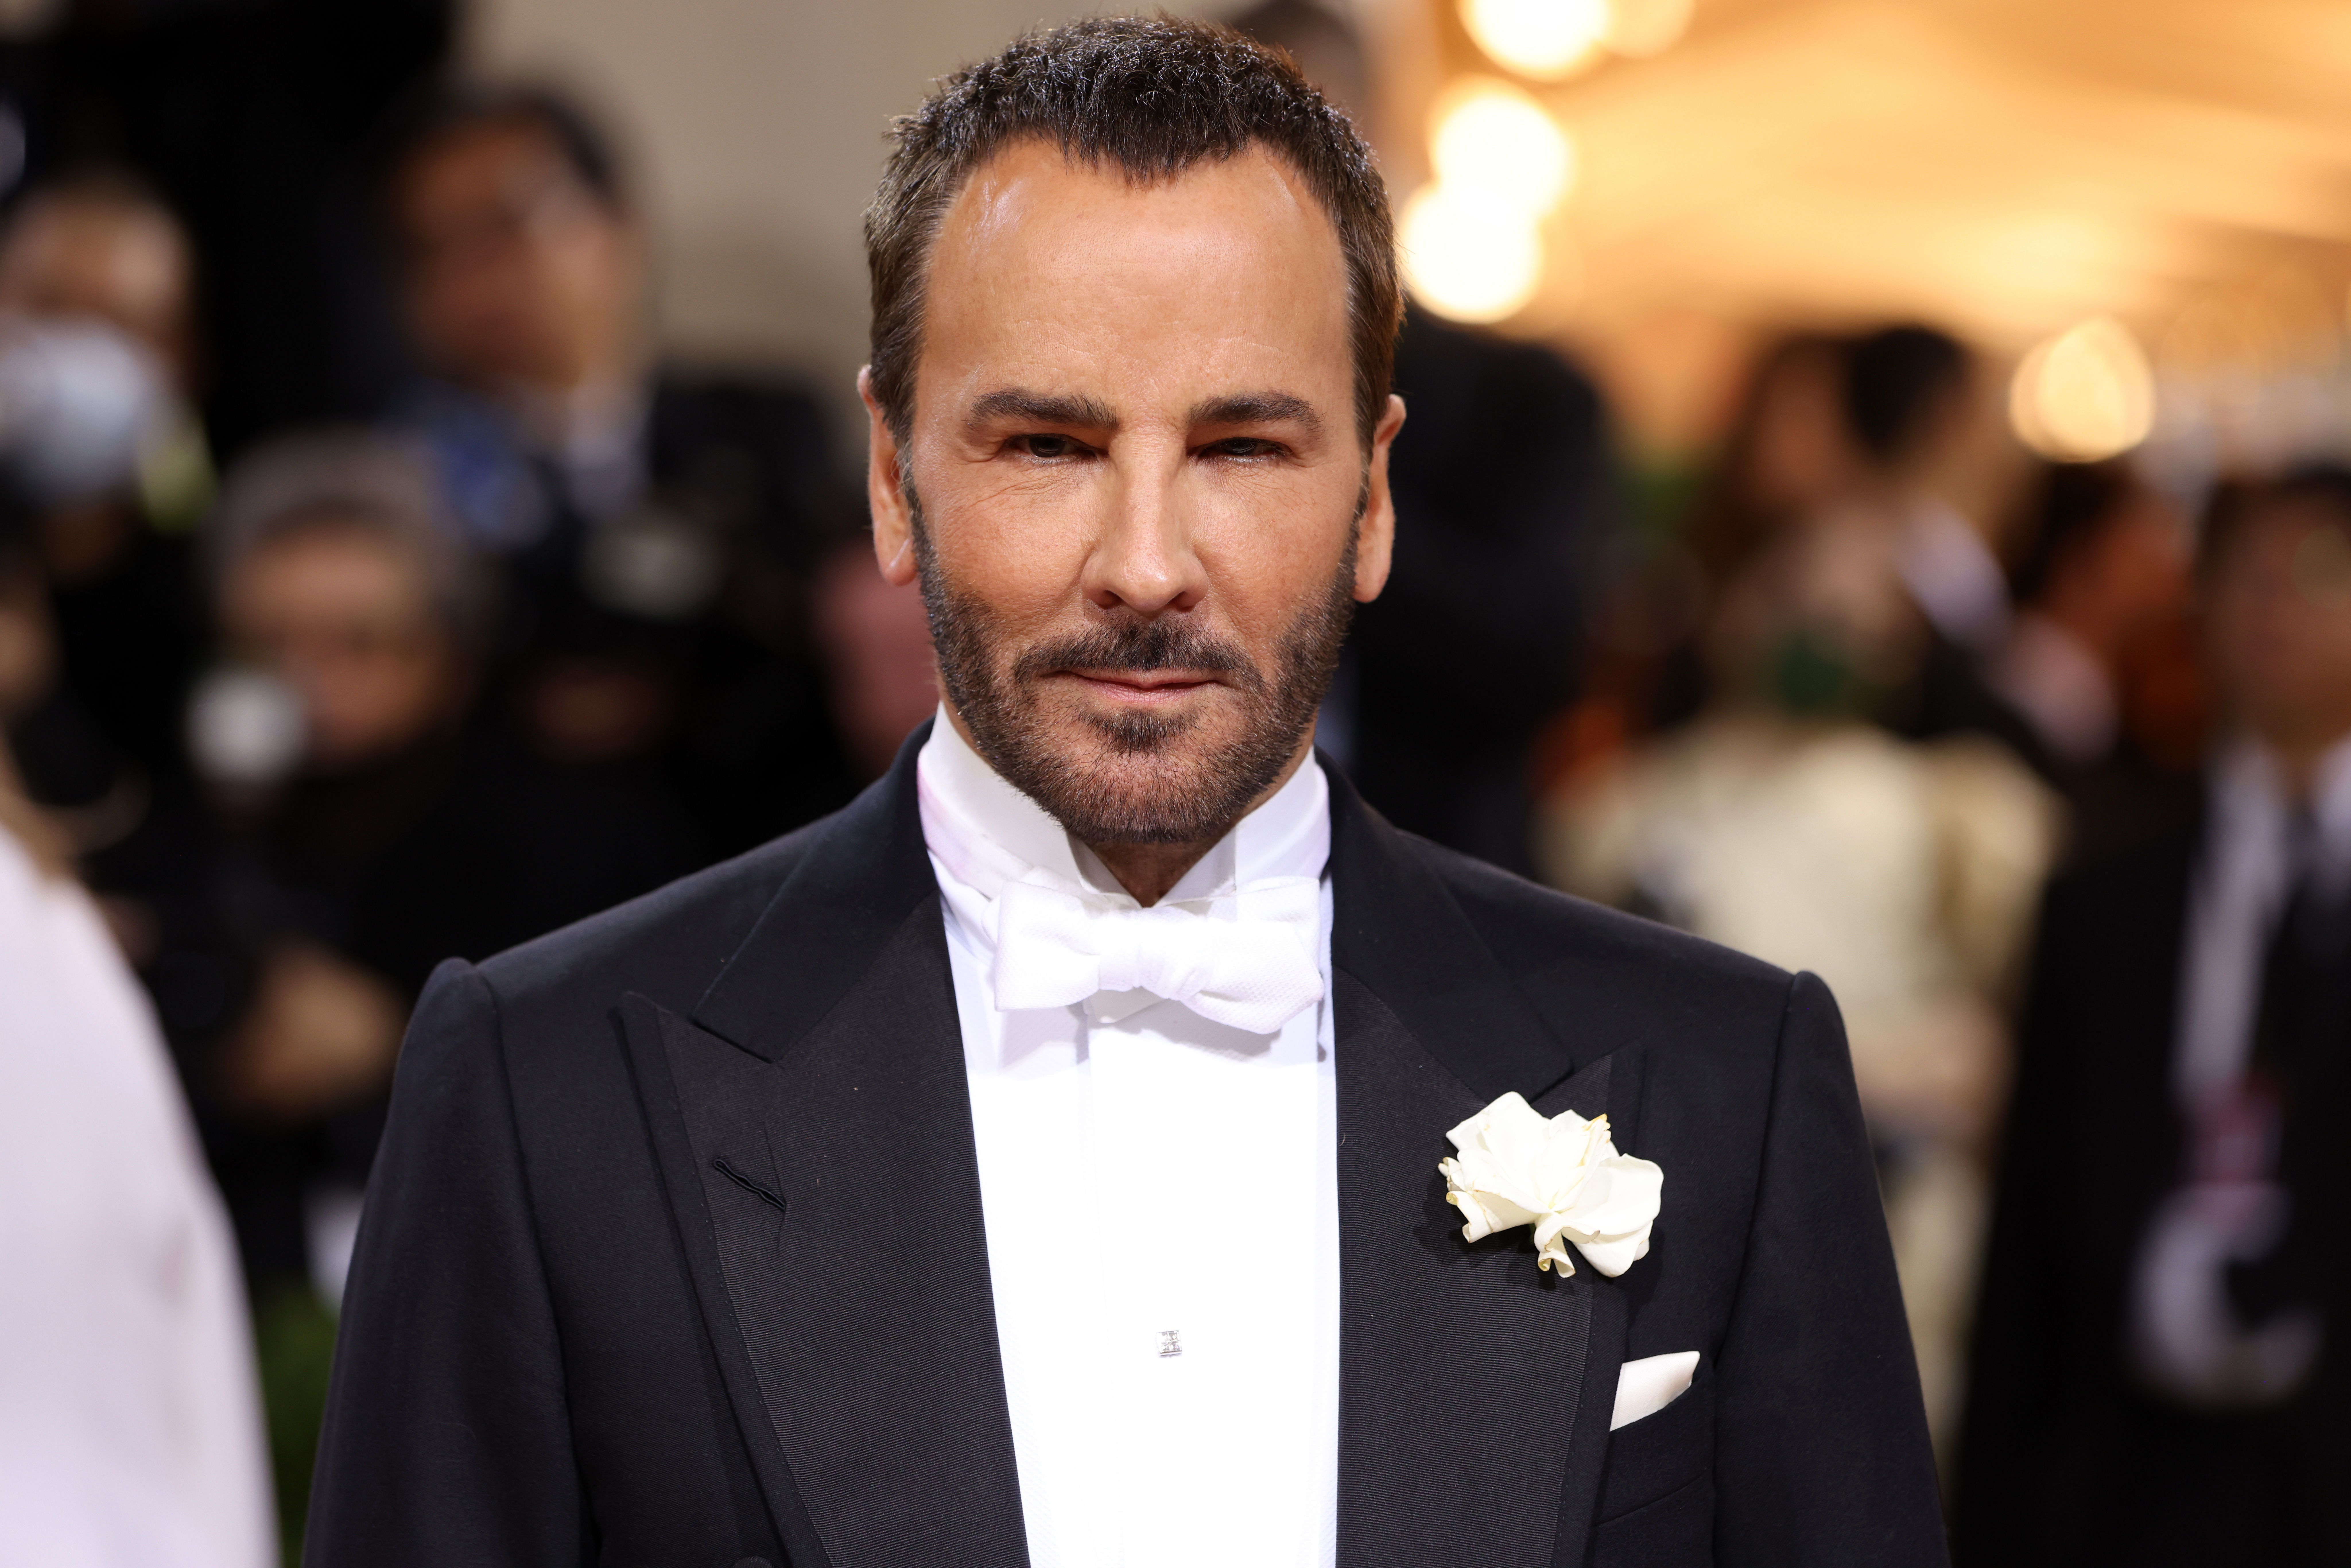 Gucci owner Kering in advanced talks to buy Tom Ford - WSJ | Reuters